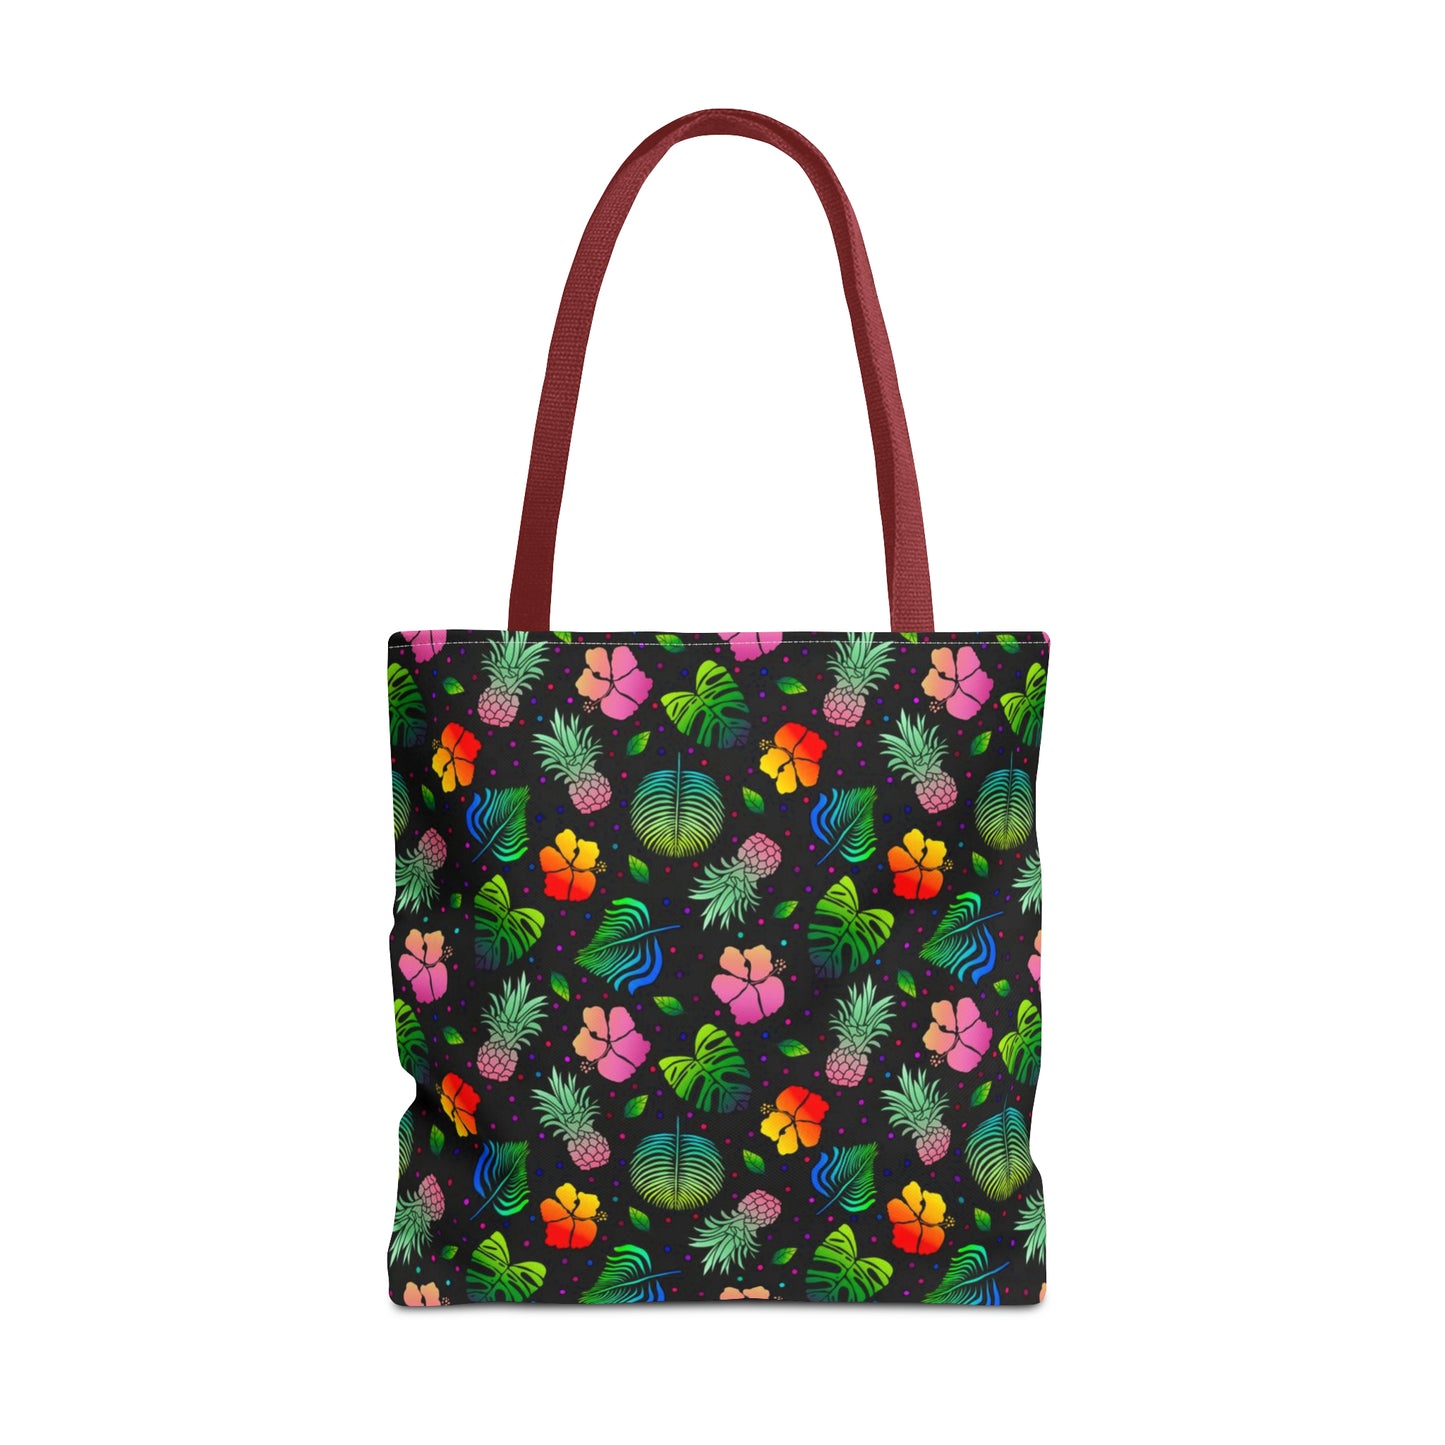 Pineapple Perfection Tote Bag